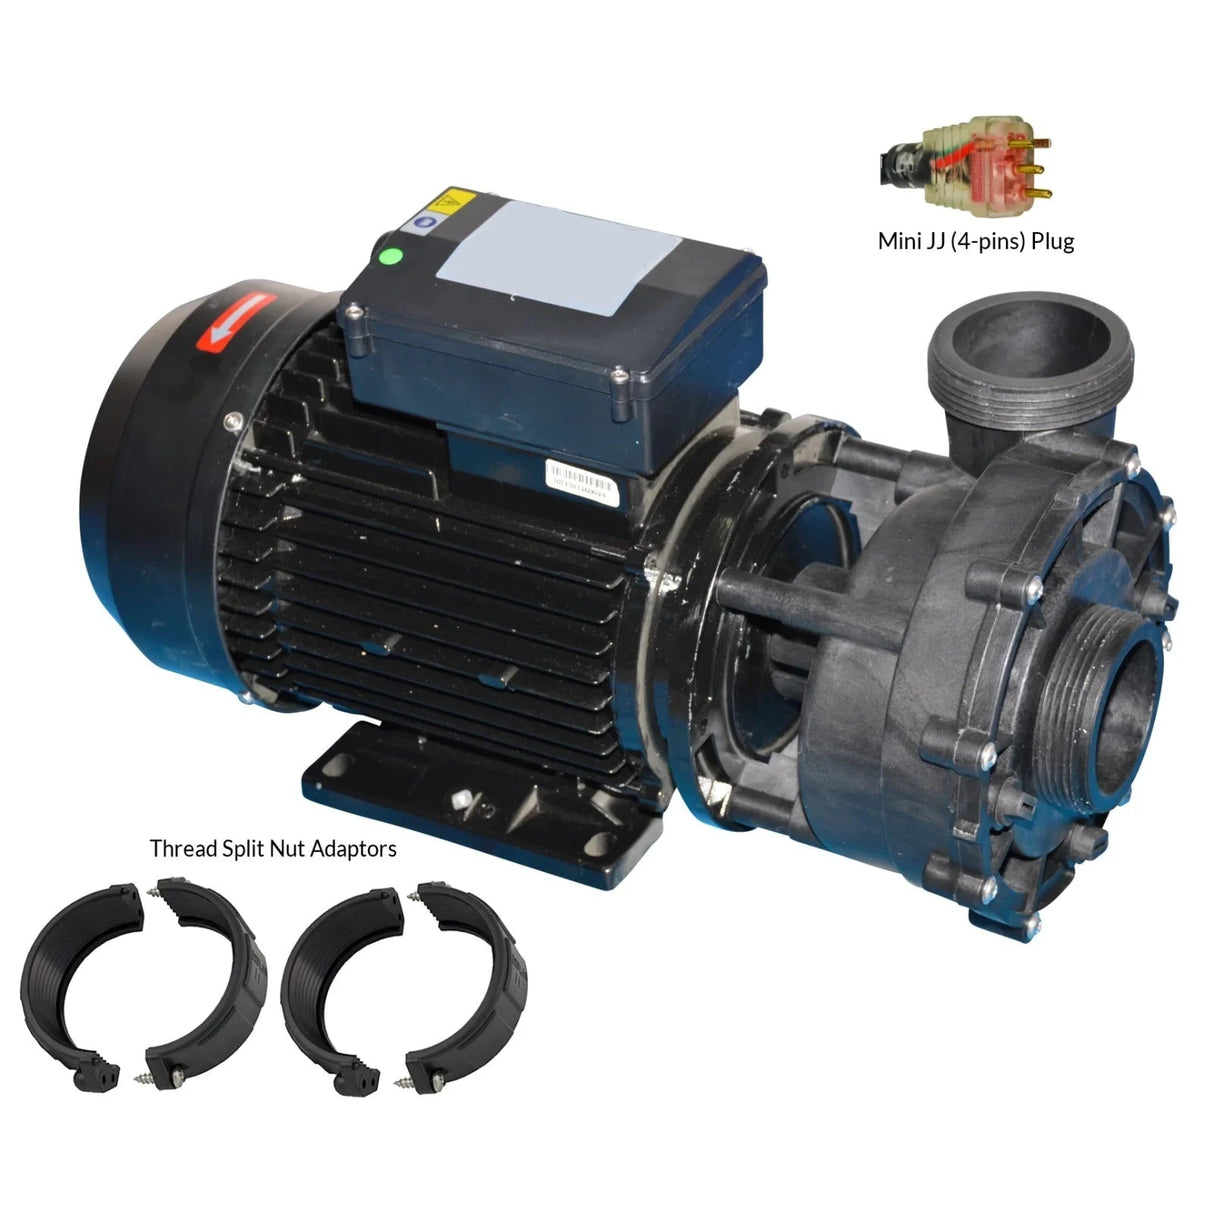 2.5 Hp Maxi-Flow Two Speed Spa Pump Replacement - Q6888 Q6808 2.5Hp 2-Speed Mini Jj Plug See Notes